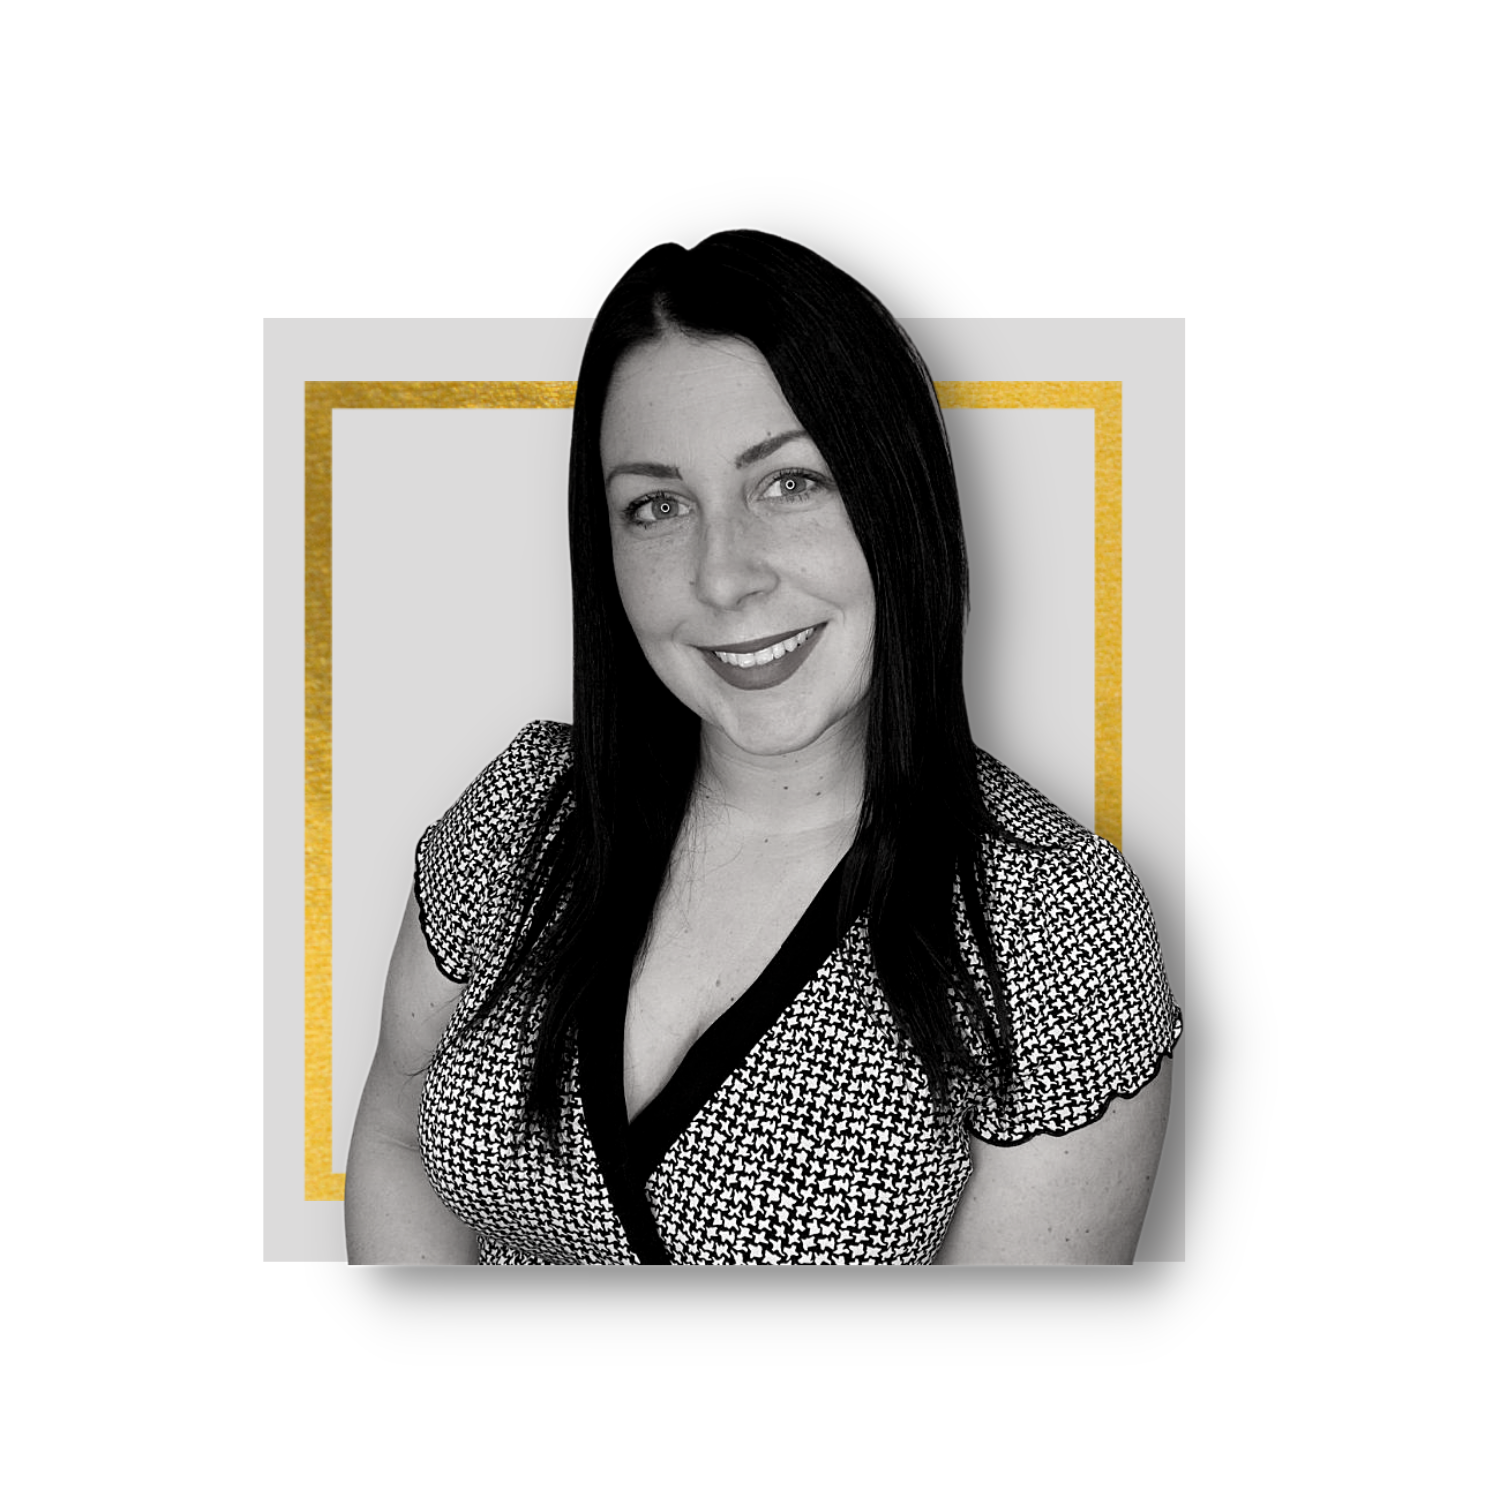 Stephanie Viscounte, Office Manager/Sales & Marketing at PH Design, builders in Northeast Ohio